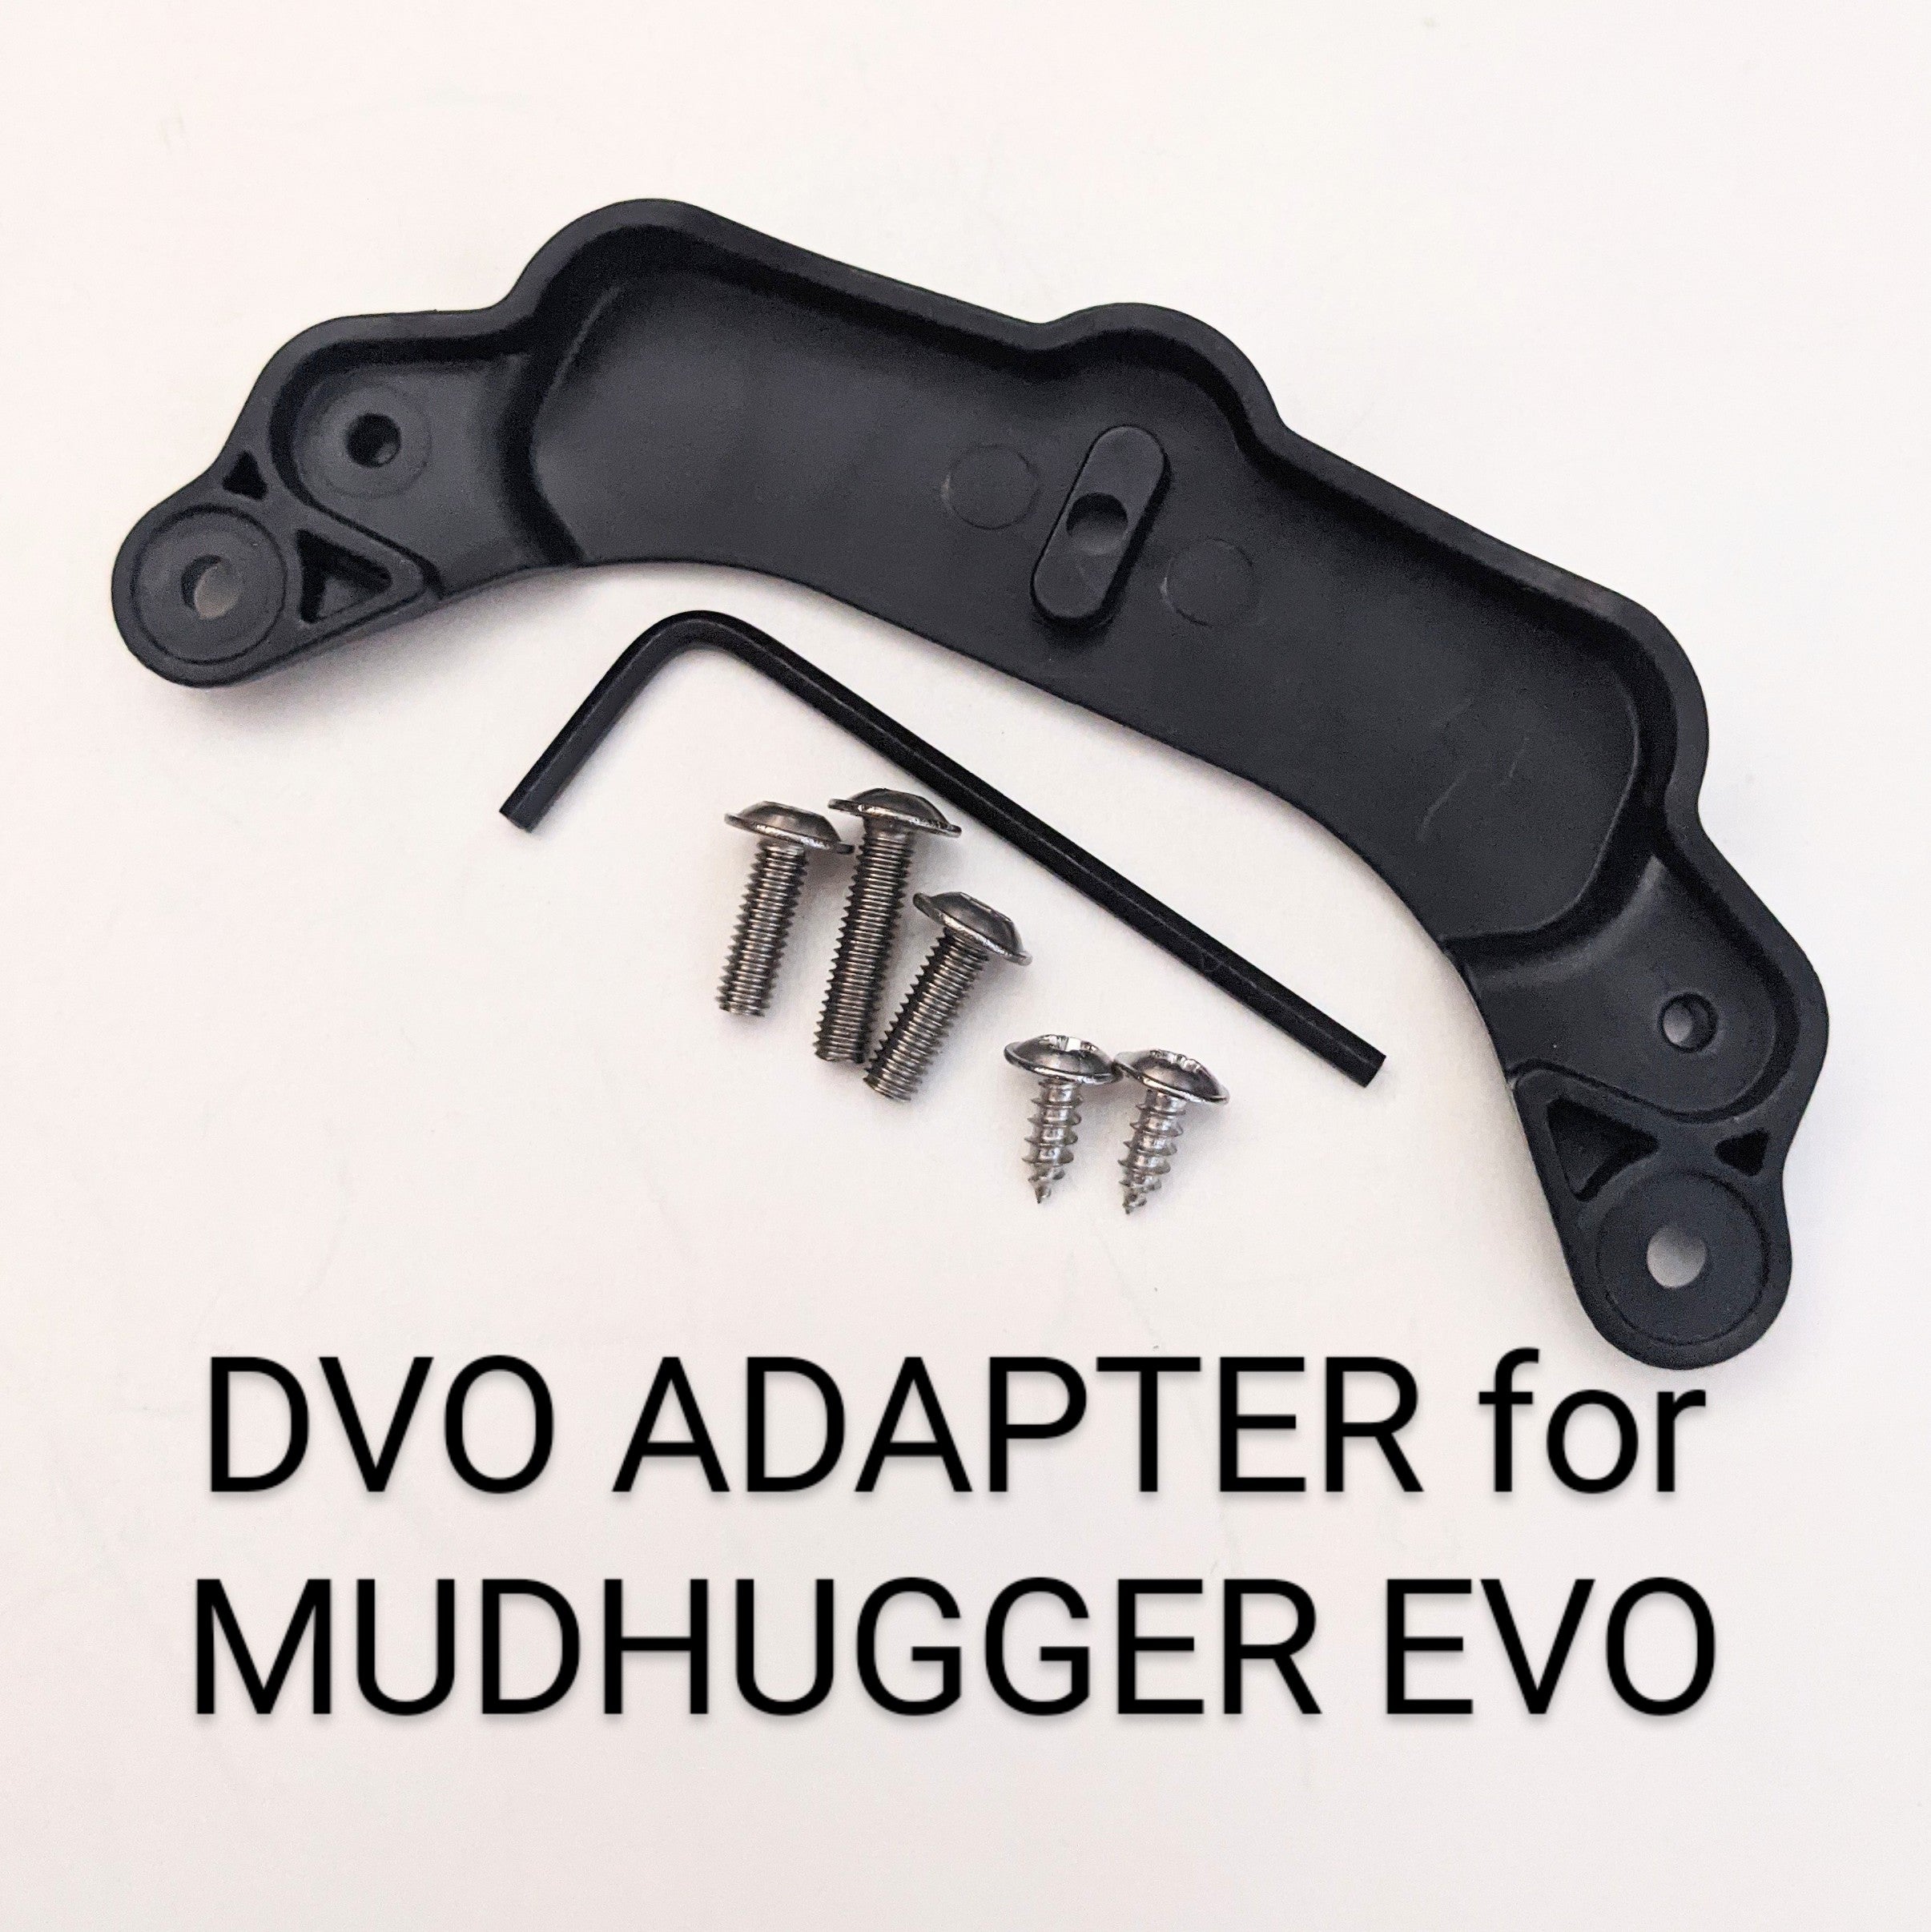 Mudhugger EVO Bolt-On (LONG) default fitting for FOX (OPTIONS FOR ZEB, RECON, DVO AND OHLINS SEE BELOW)